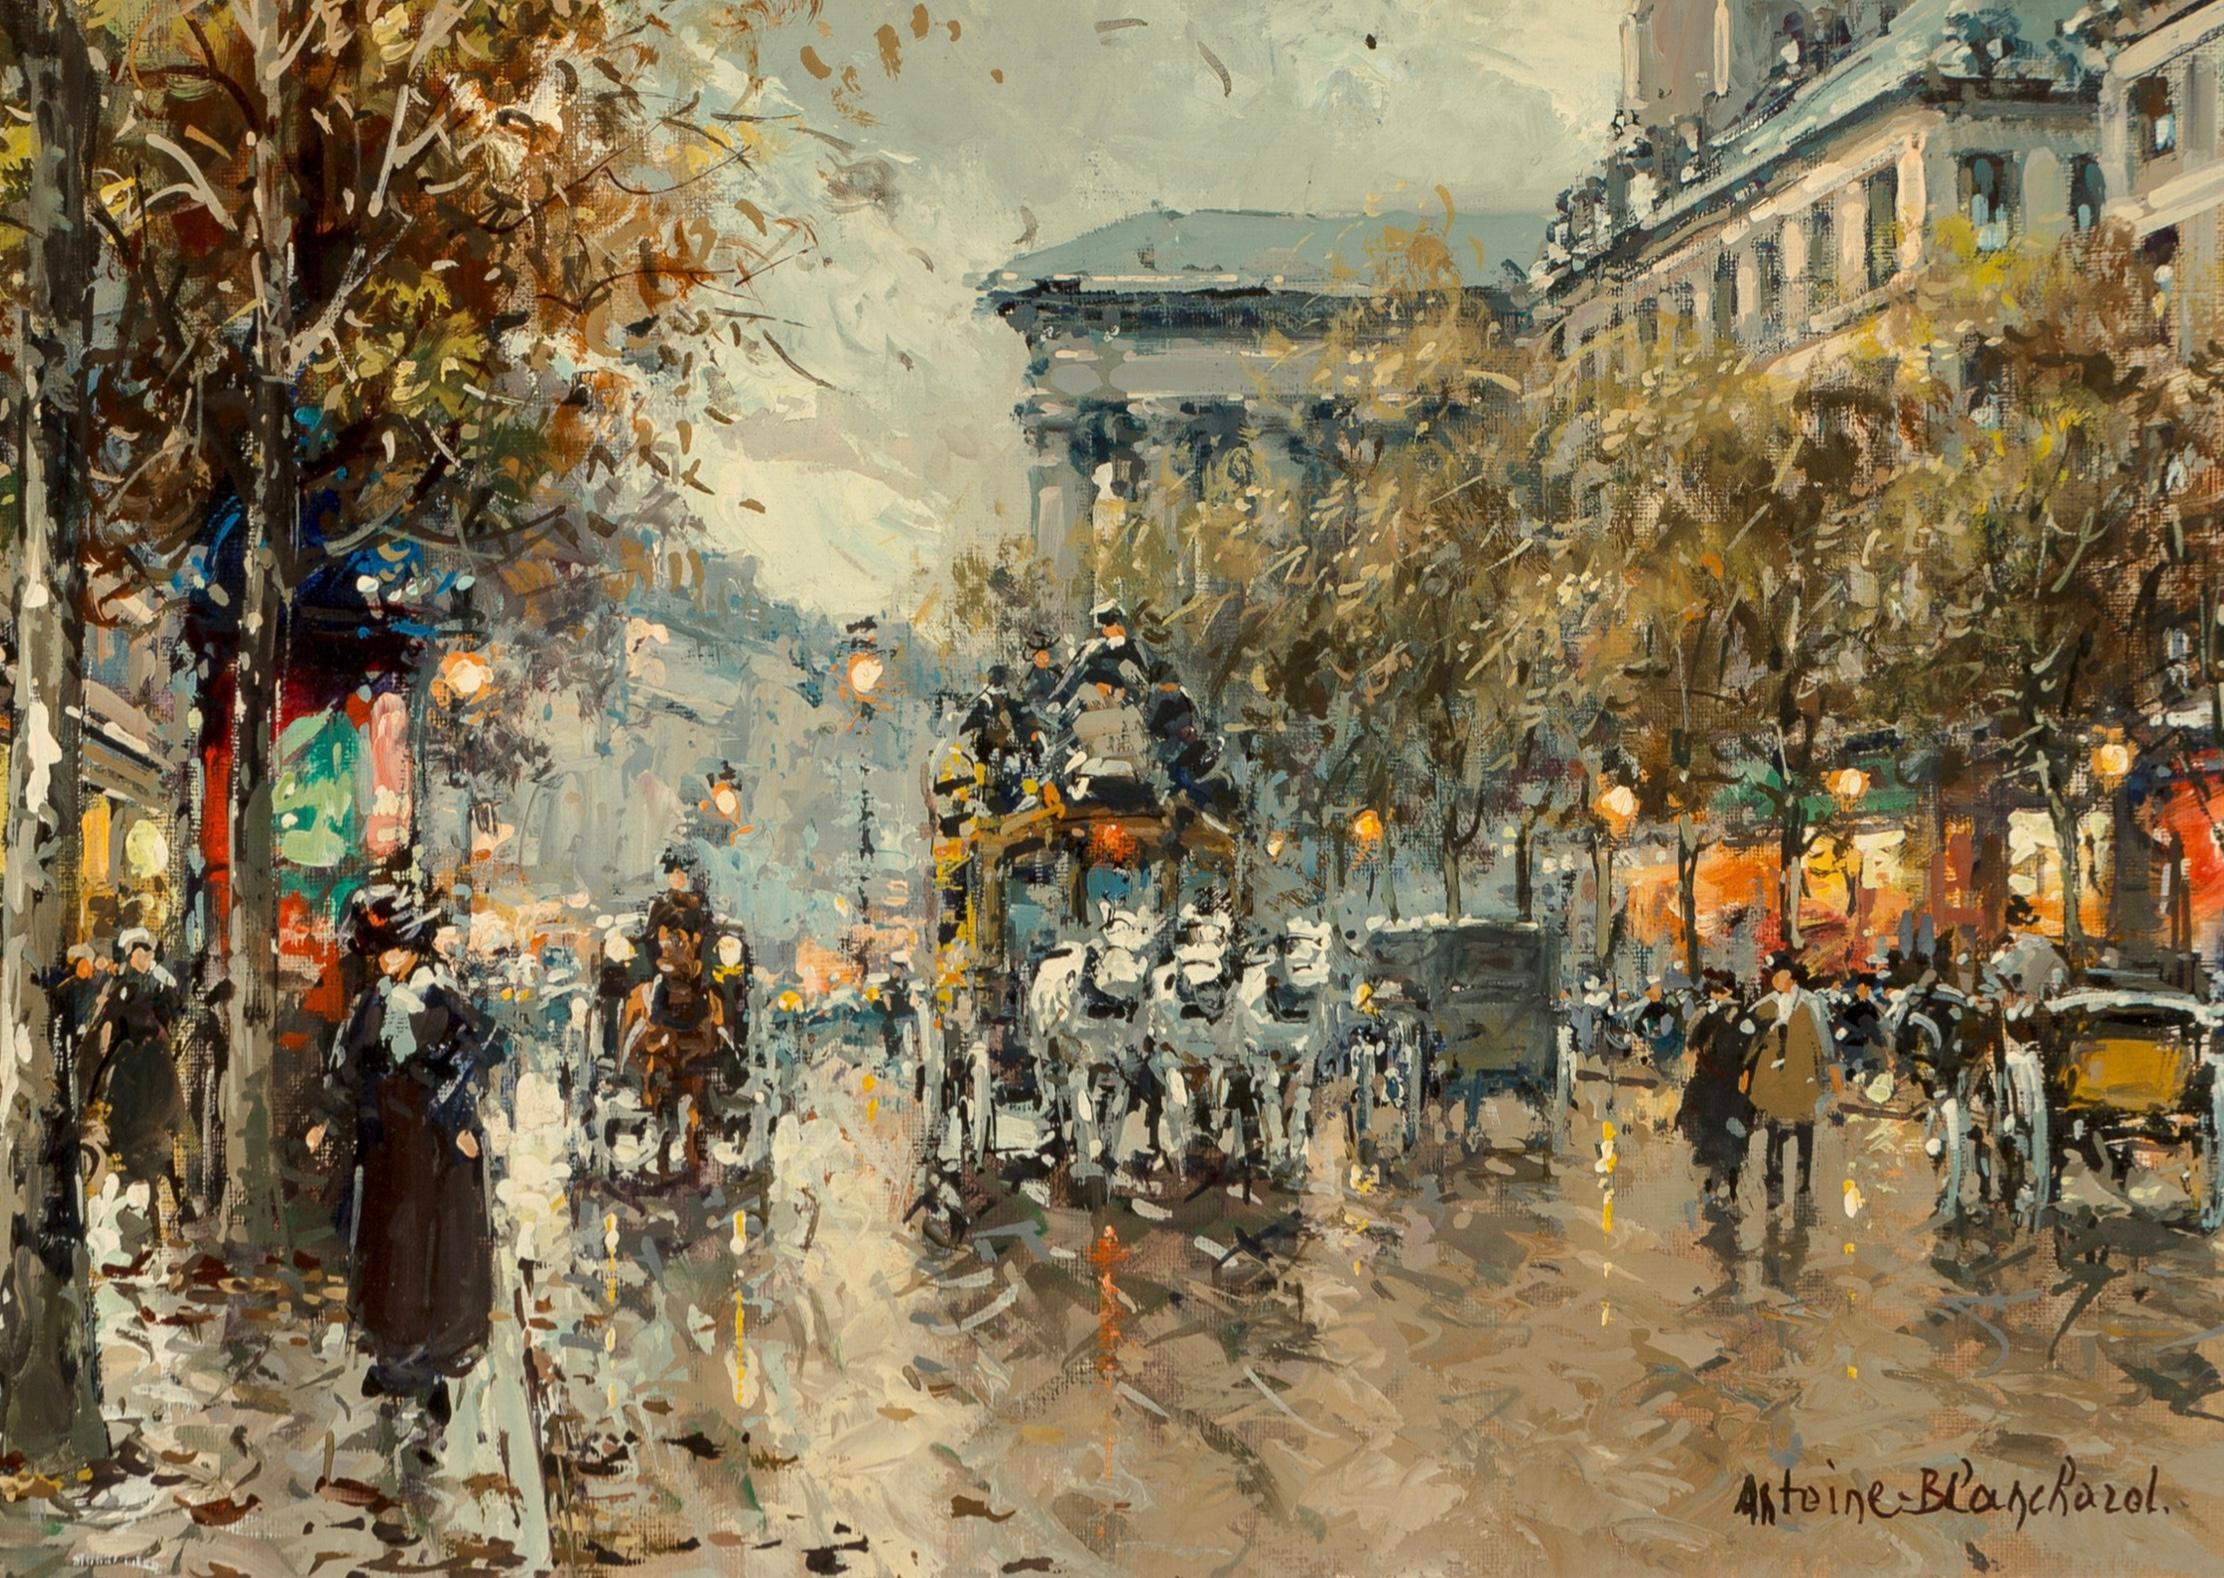 Antoine Blanchard (French, 1910-1988)
Boulevard de la Madeleine
Oil on canvas
Measures: 18 x 21 inches (45.7 x 53.3 cm)
Framed: 24 X 27.5 Inches
Signed lower right: Antoine Blanchard

This magnificent painting is not the standard 13x18 inches that